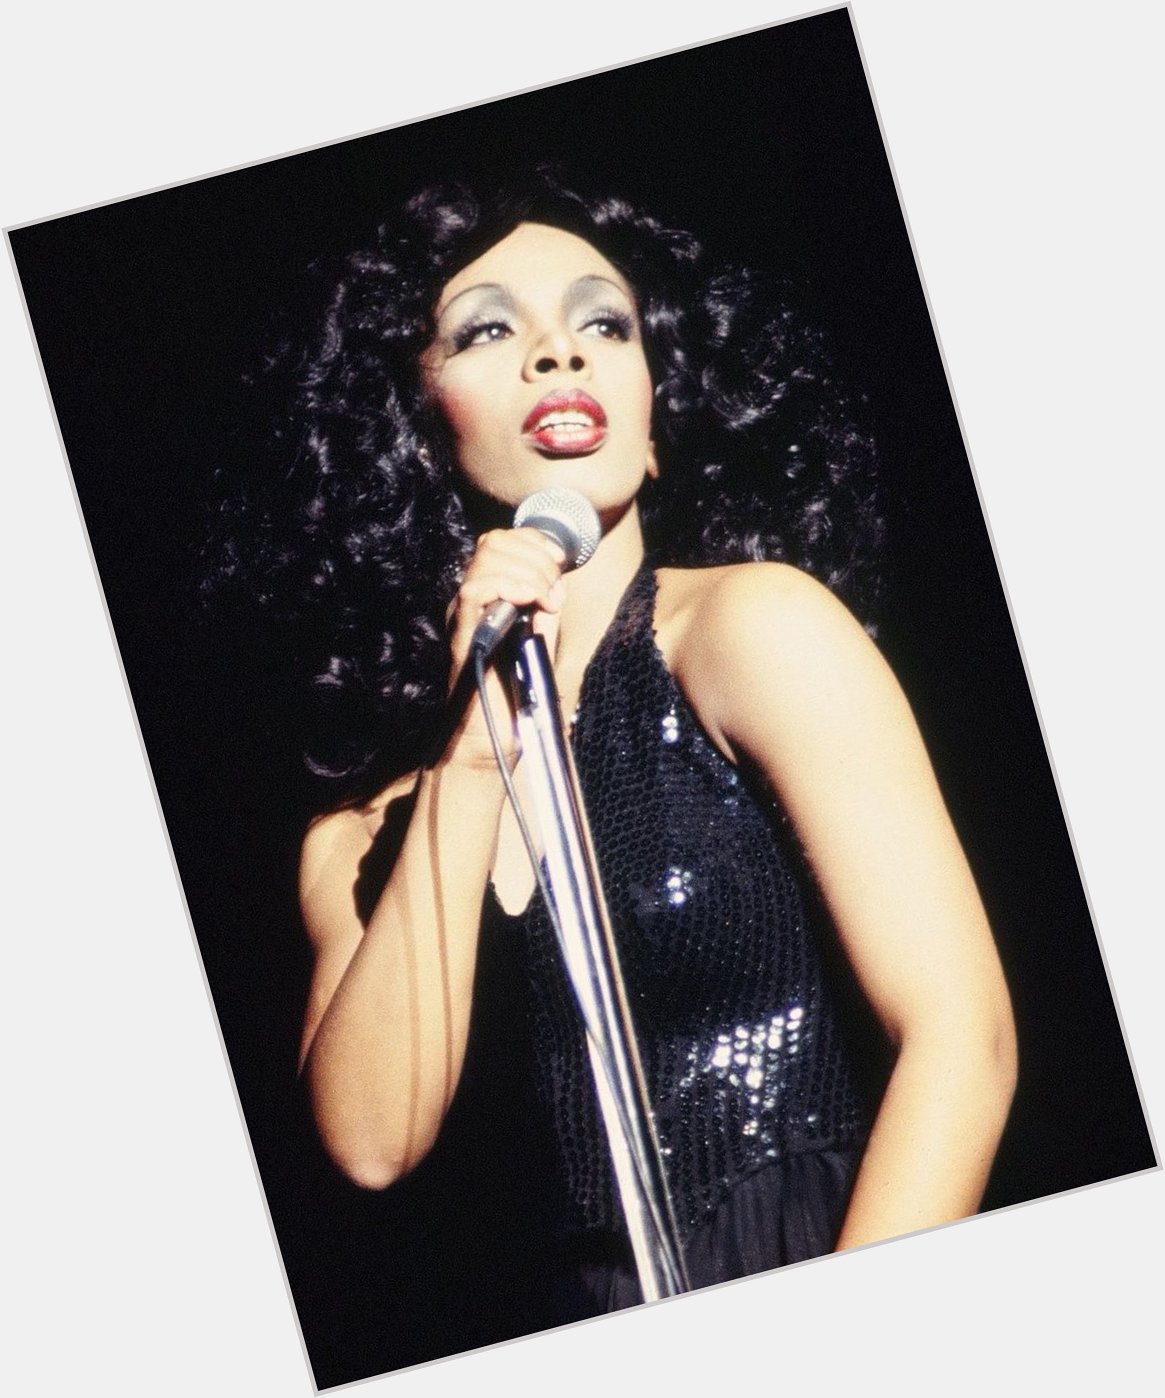 Gone, but never forgotten. 

Wishing the icon, legend and the Queen of Disco, Donna Summer, a very happy birthday. 